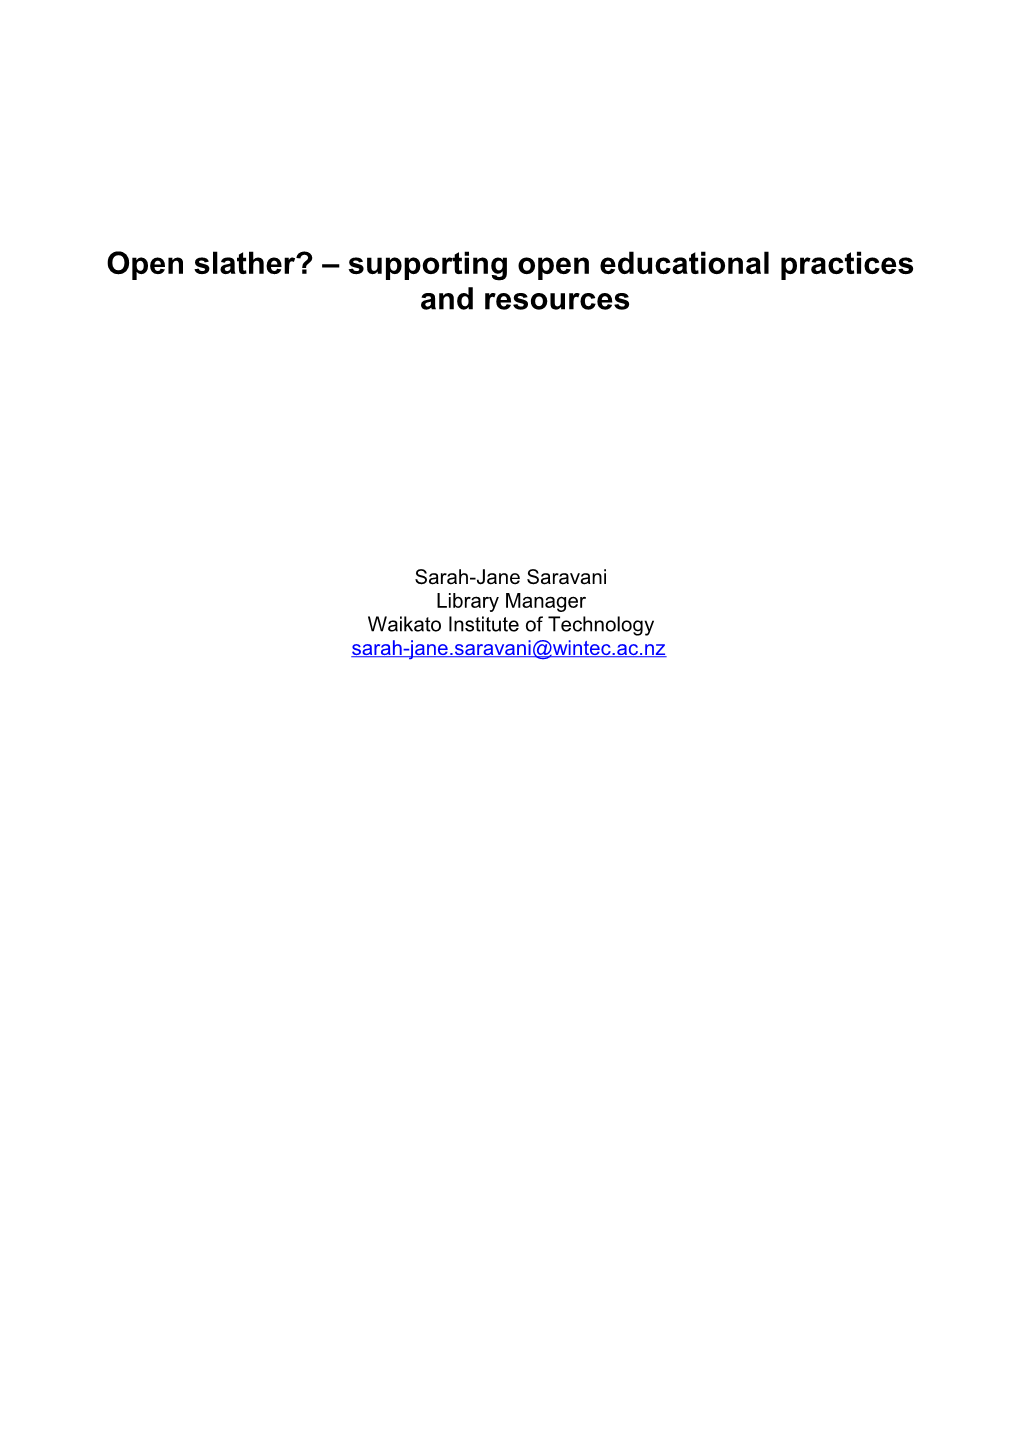 Open Slather? Supporting Open Educational Practices and Resources